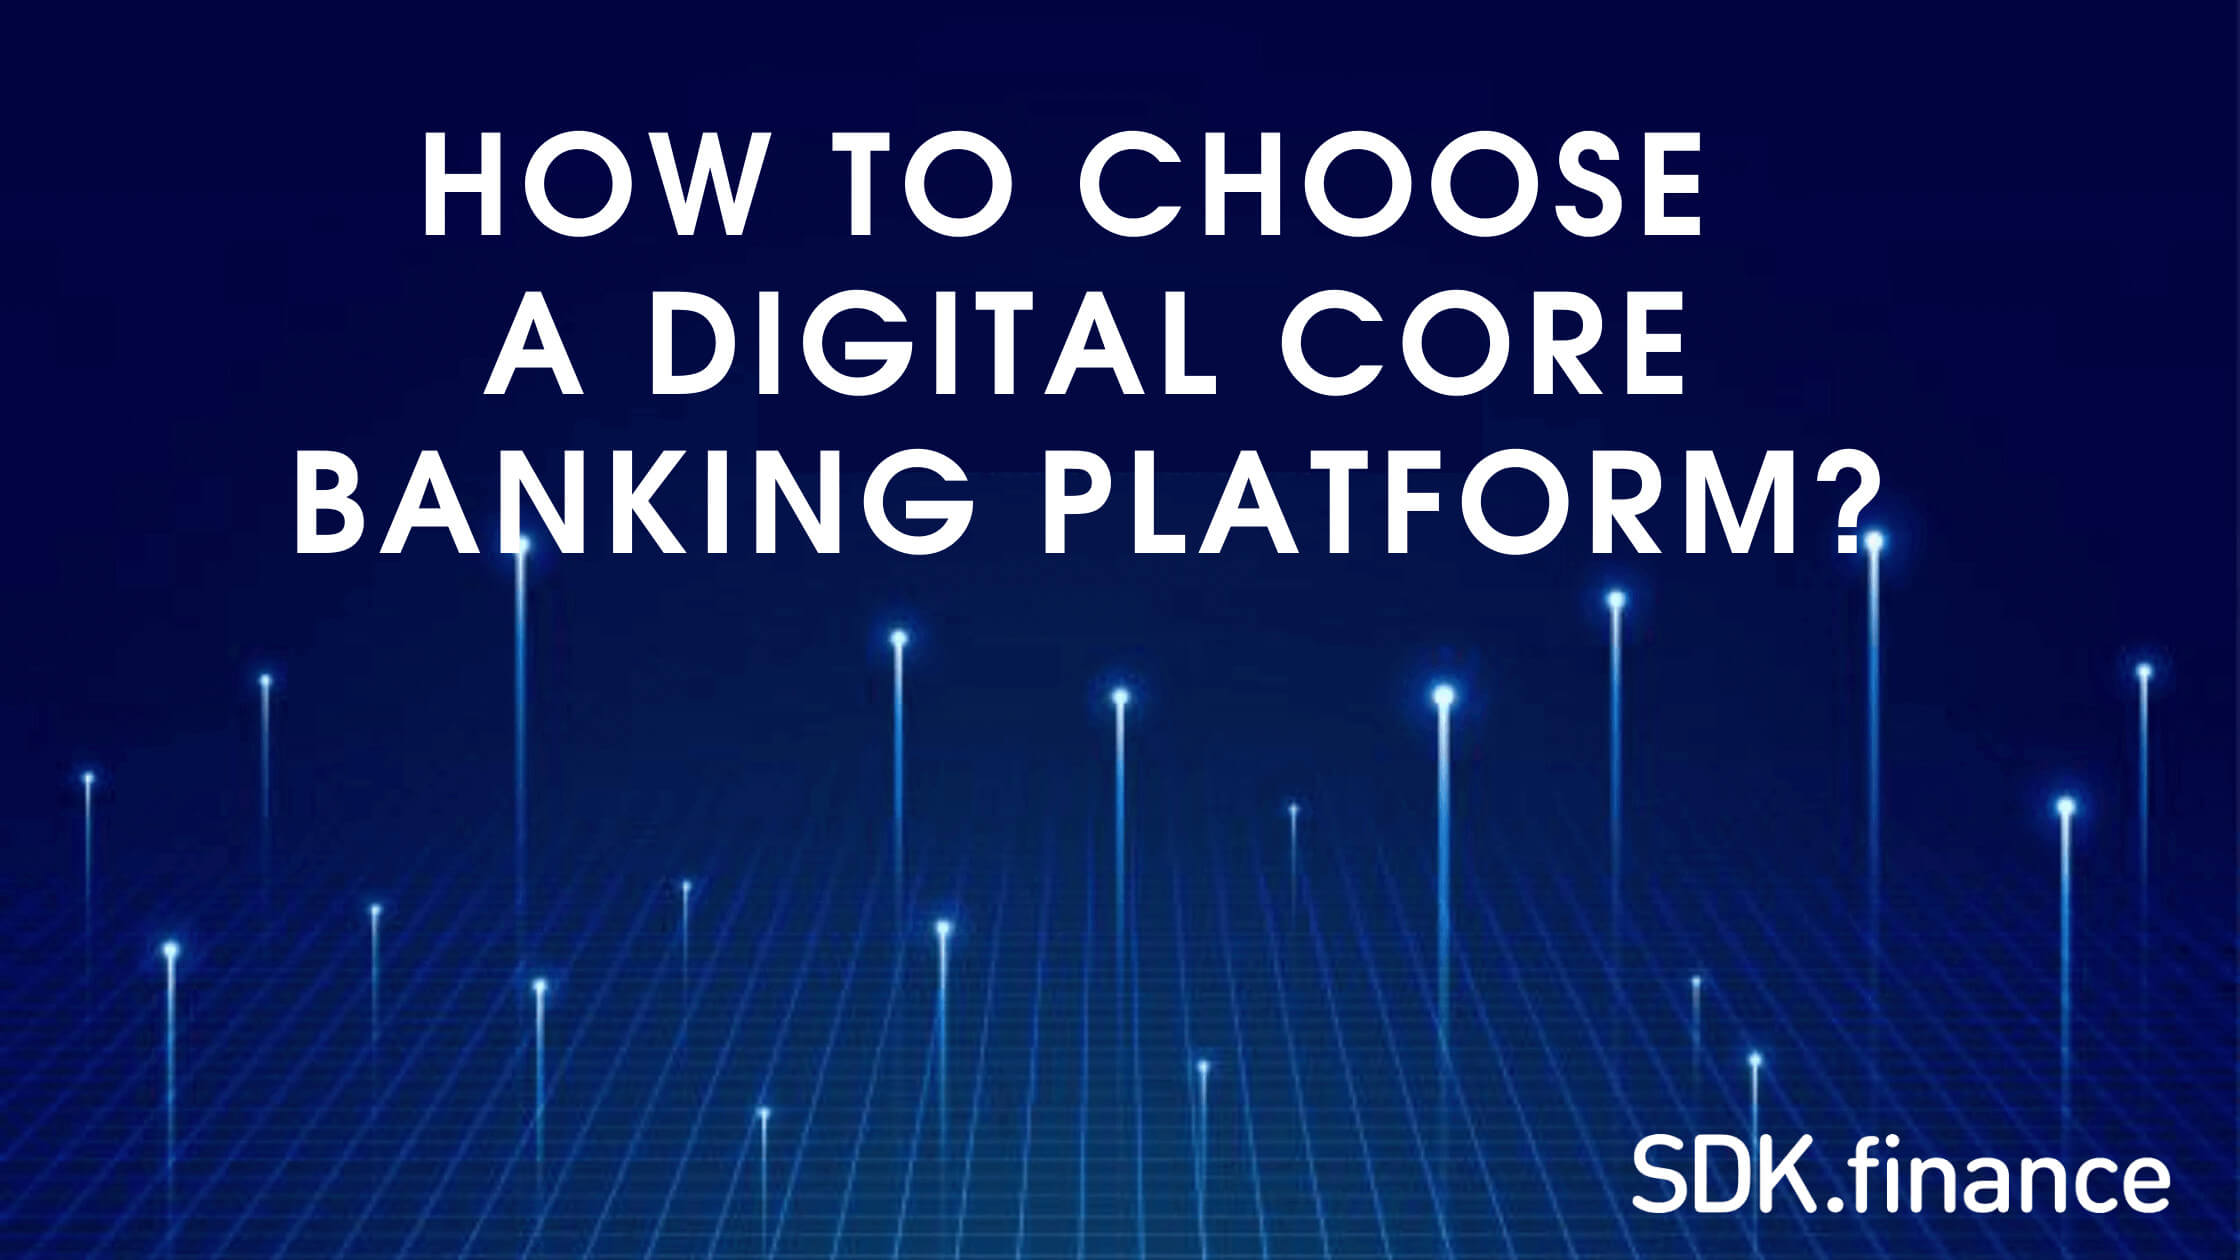 How to Choose a Digital Core Banking Platform?